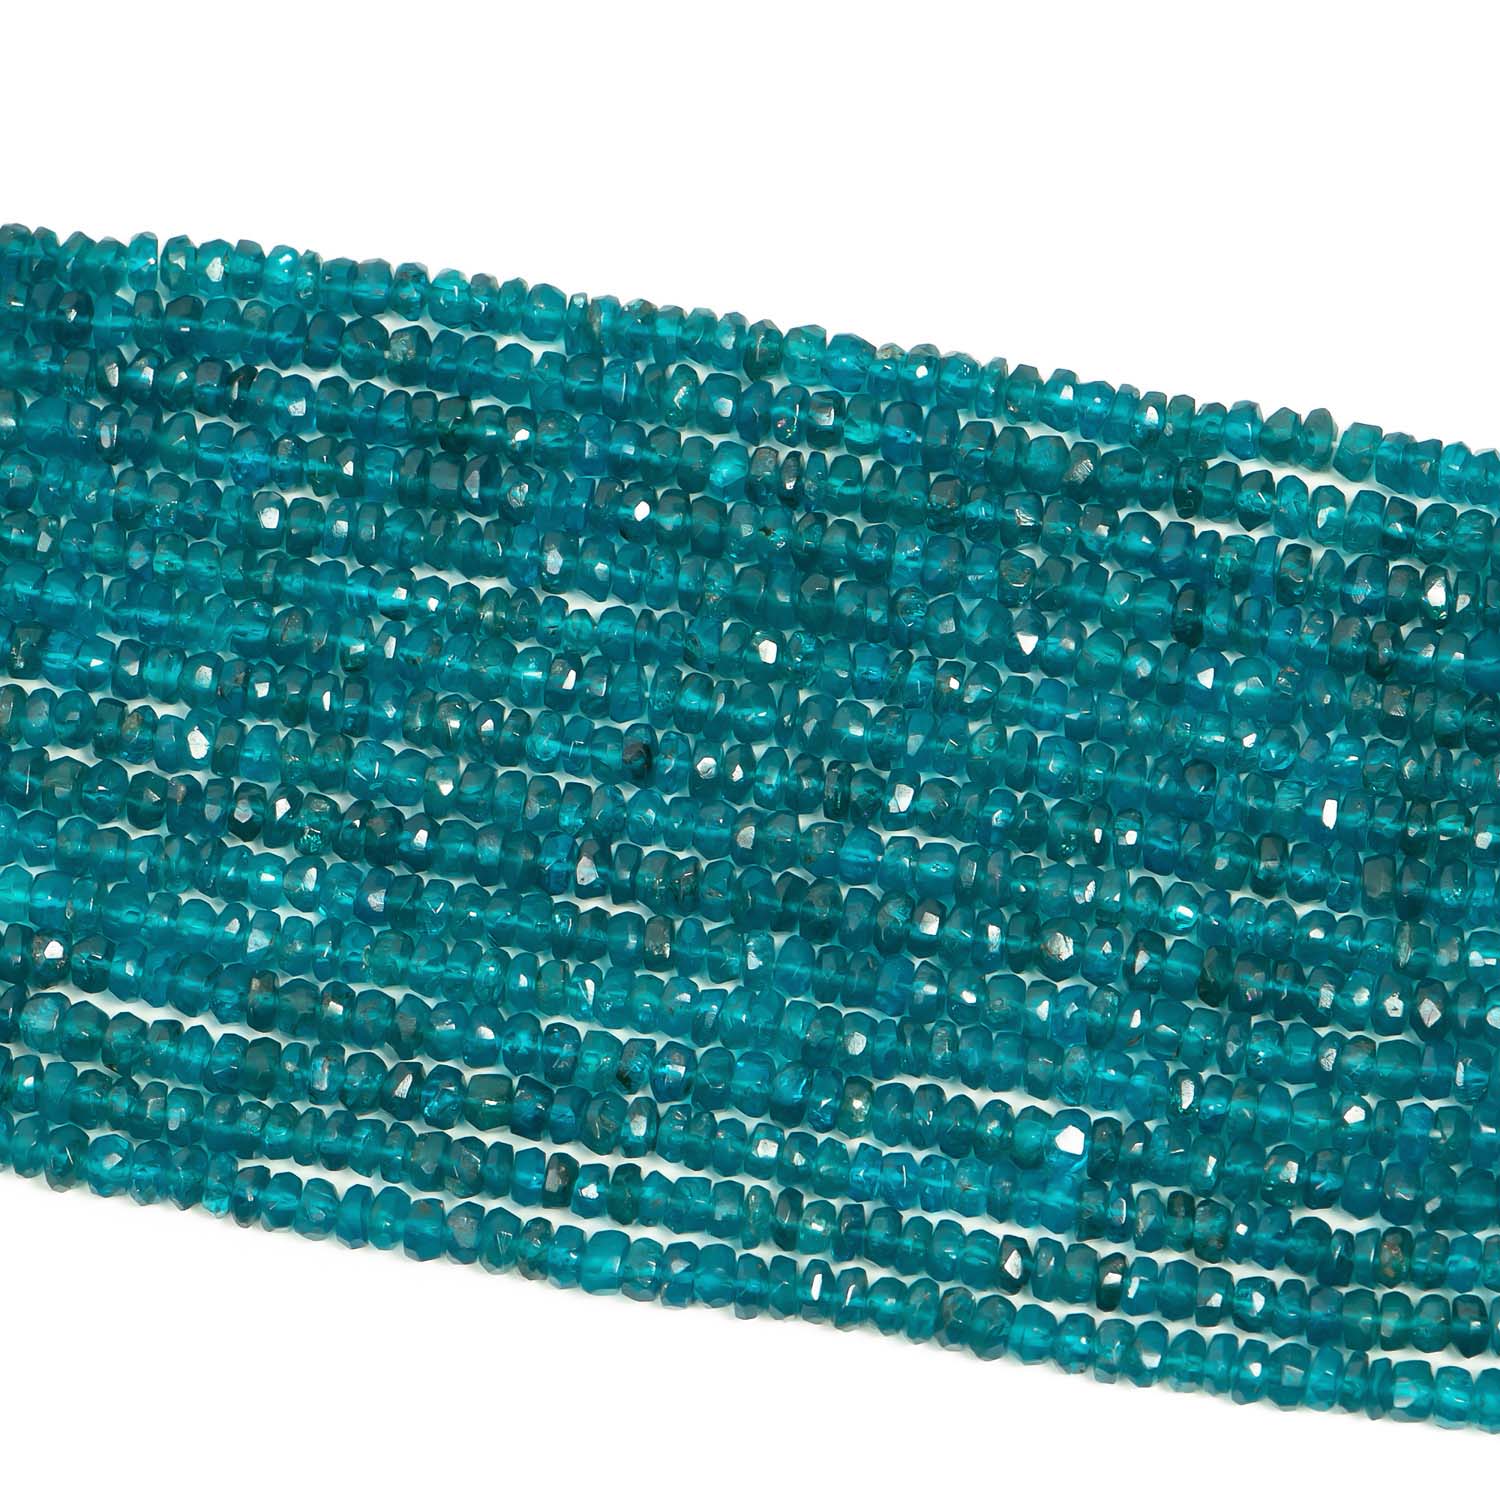 Neon Apatite Faceted Rondelle Beads, Gemstone Rondelle Beads, Wholesale Beads